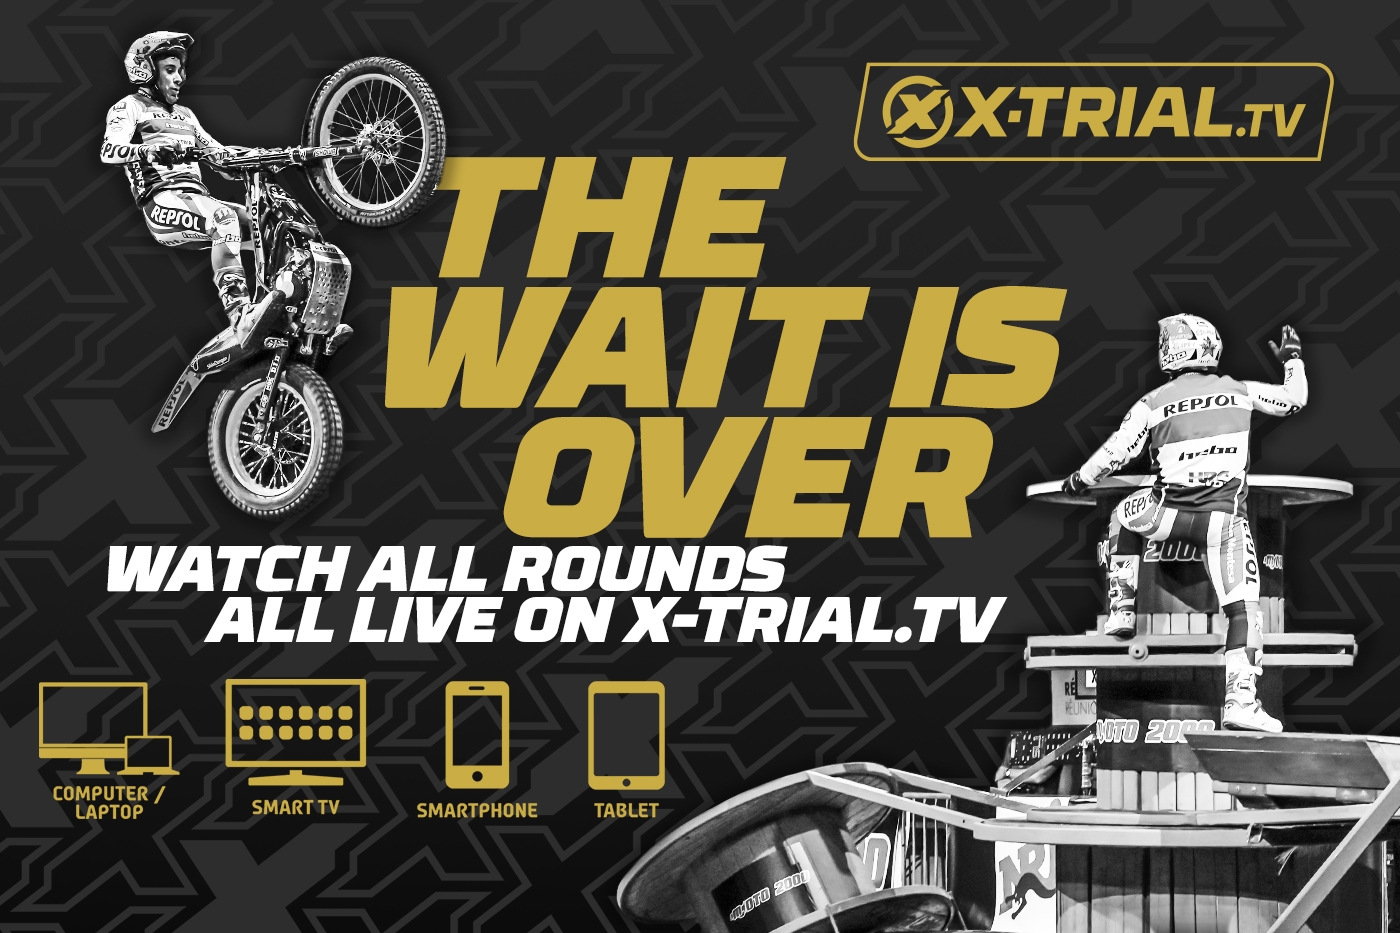 Follow X-Trial live with the X-Trial.tv Video Pass